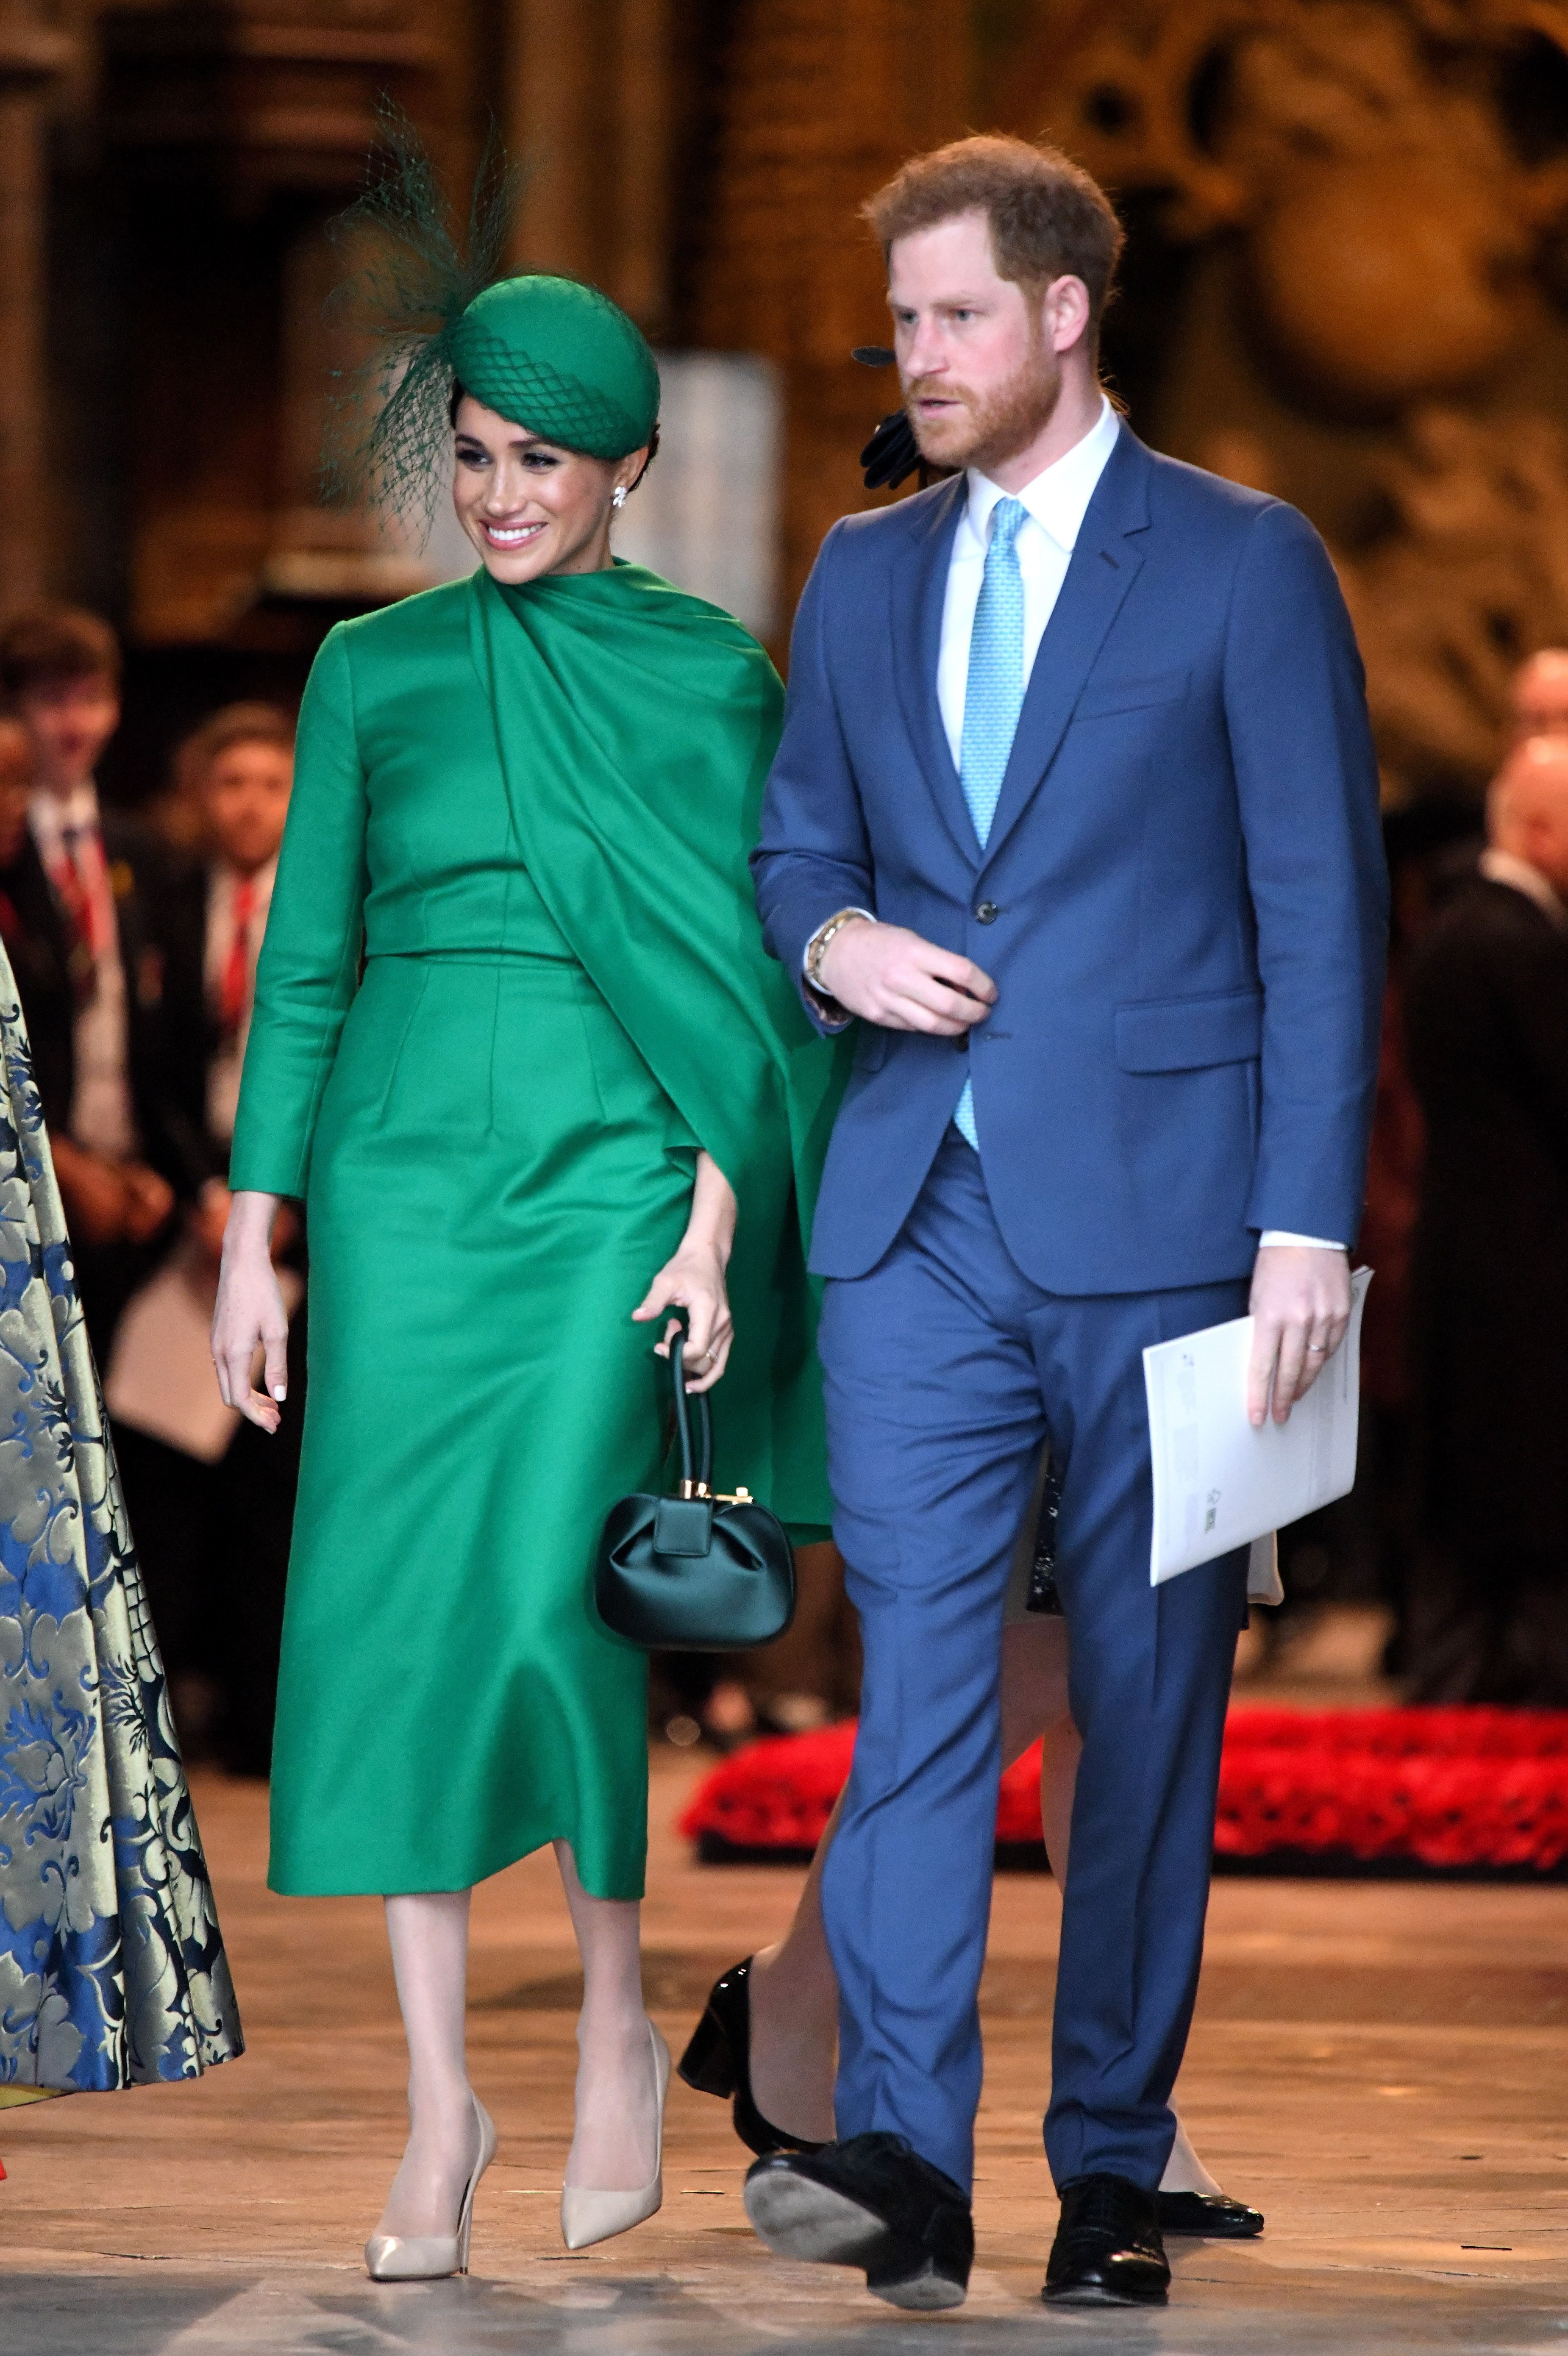 Prince Harry, Duke of Sussex and Meghan, Duchess of Sussex depart after attending the Commonwealth Day Service 2020 at Westminster Abbey on March 09, 2020 | Getty Images